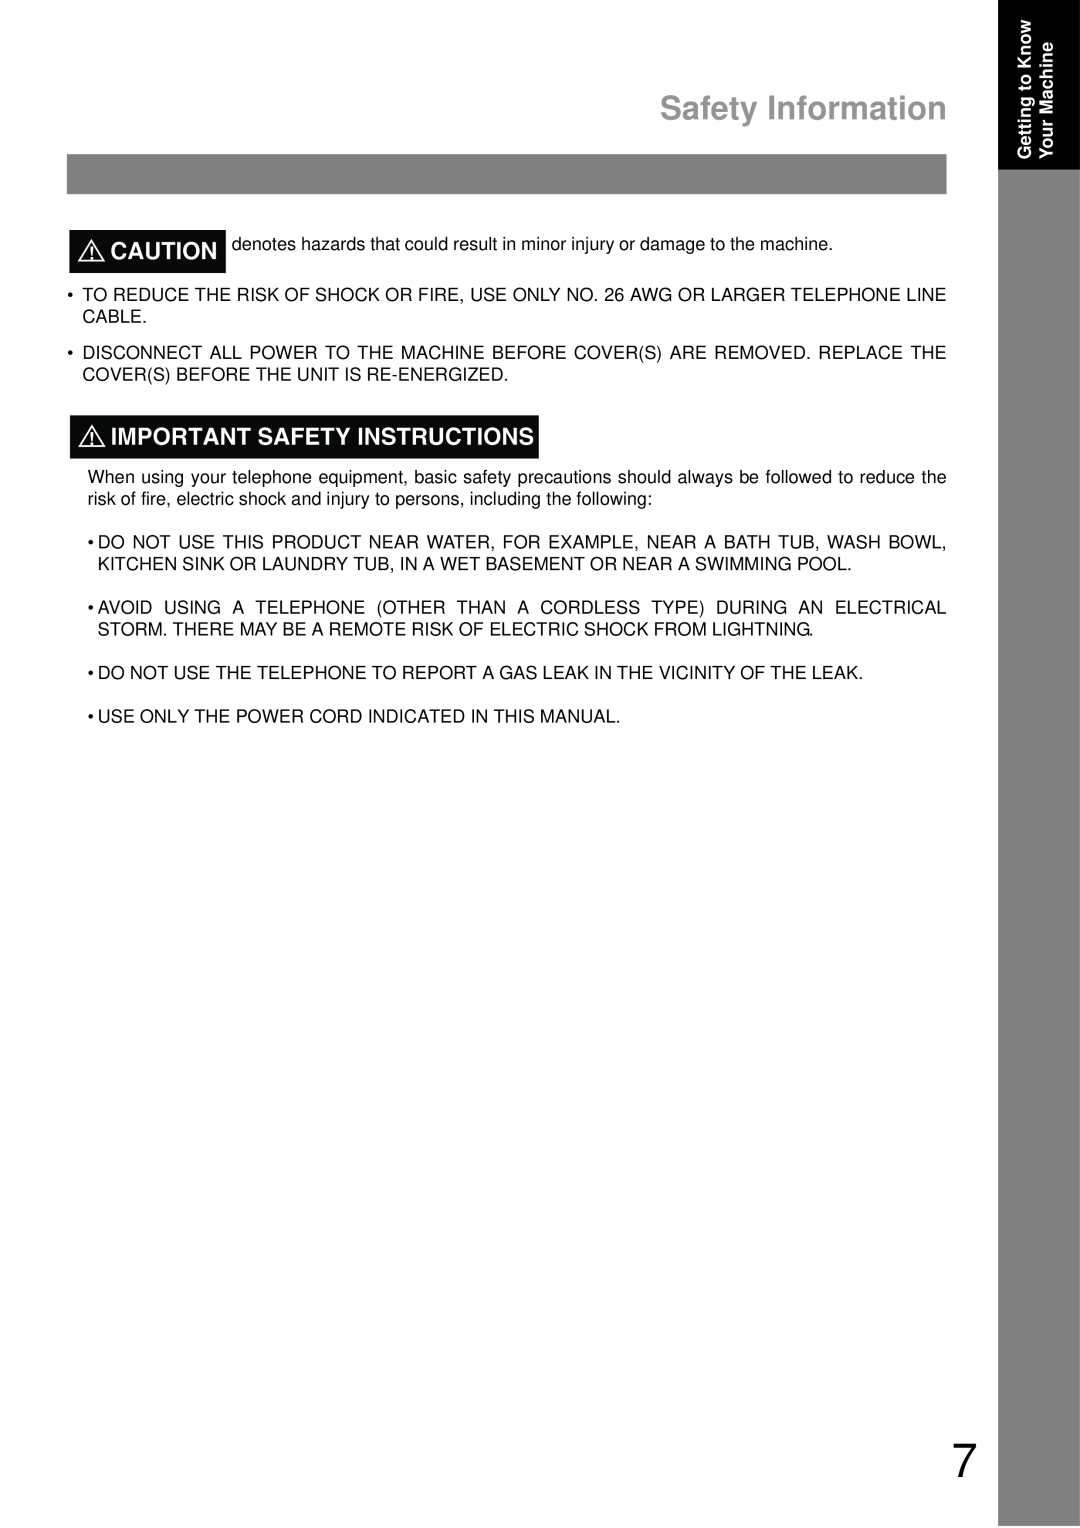 Castelle UF-490 appendix Safety Information, Important Safety Instructions 